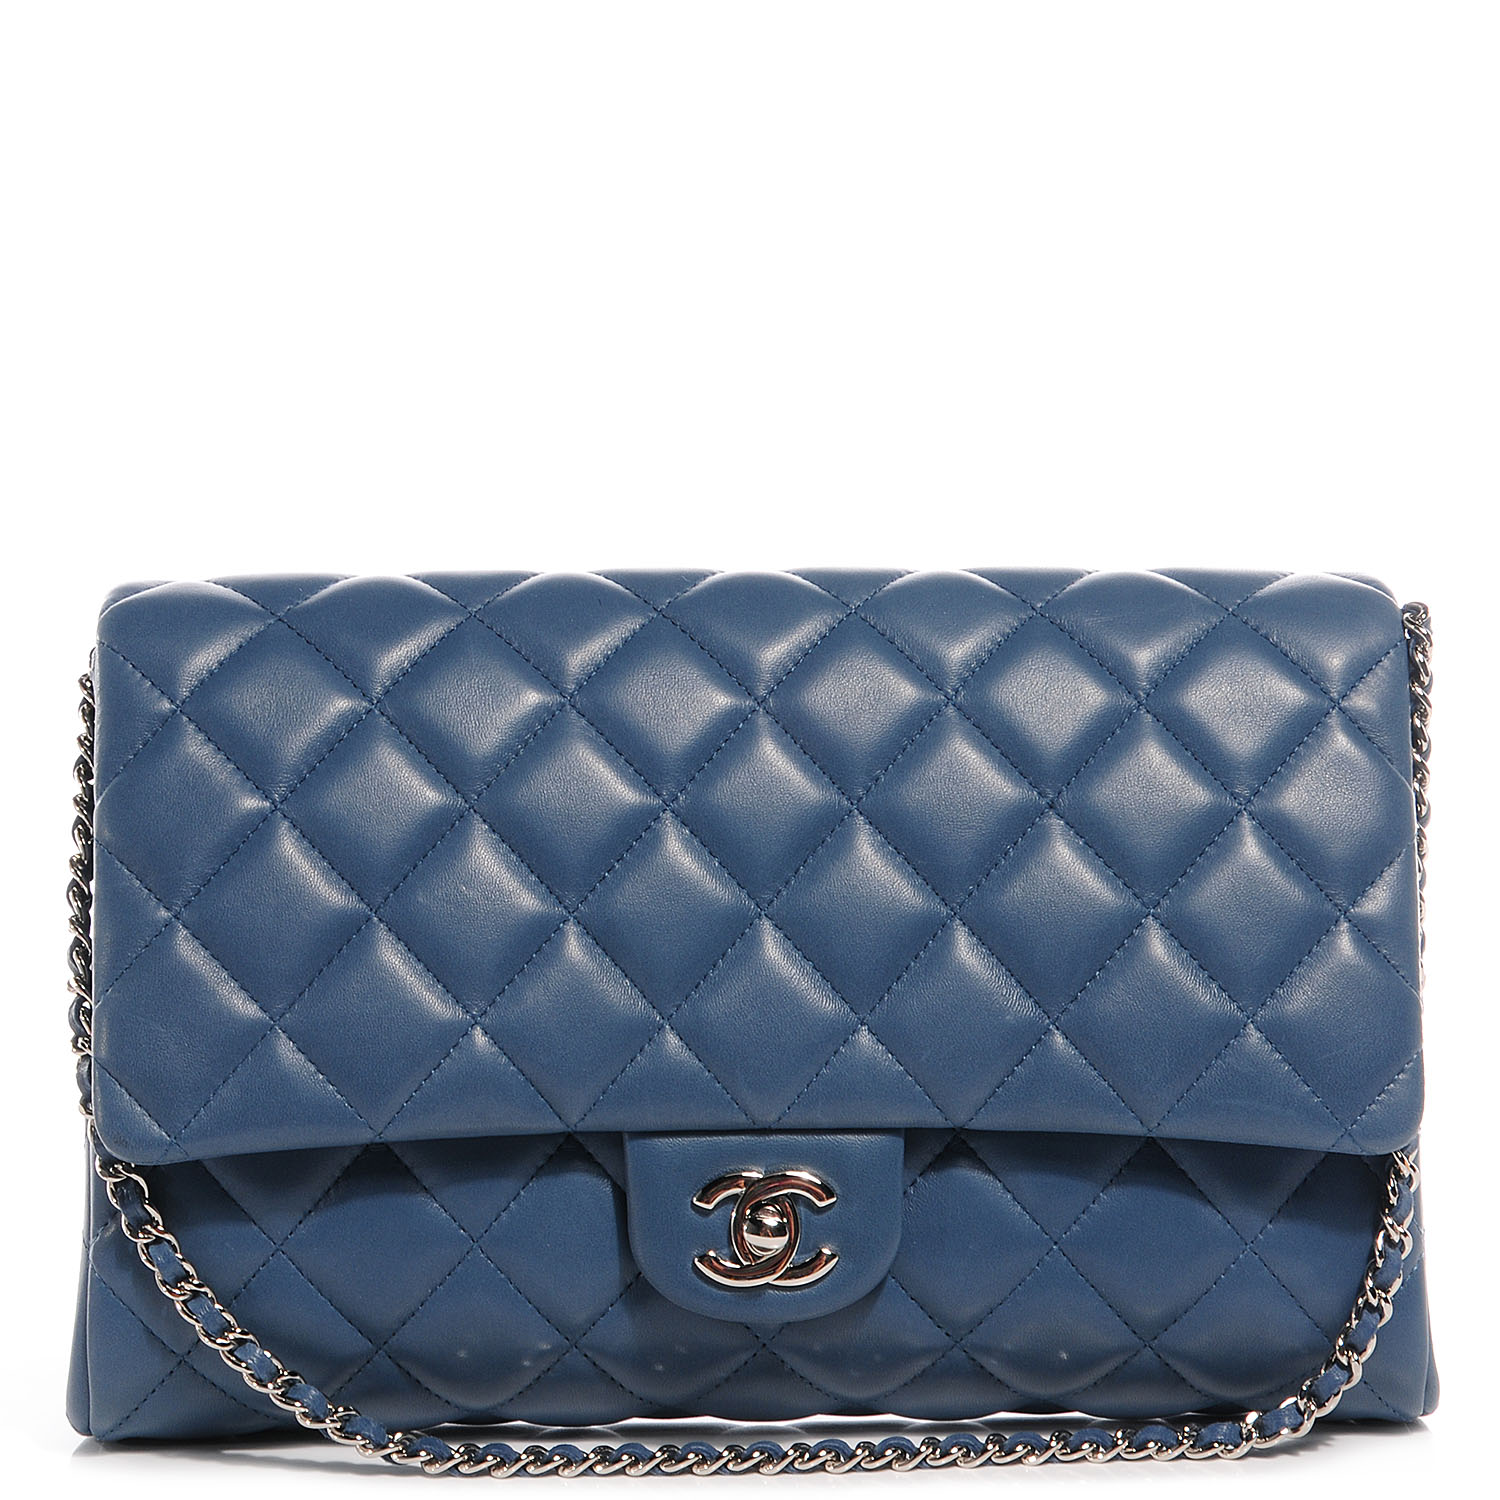 CHANEL Lambskin Quilted Clutch with Chain Flap Blue 62284